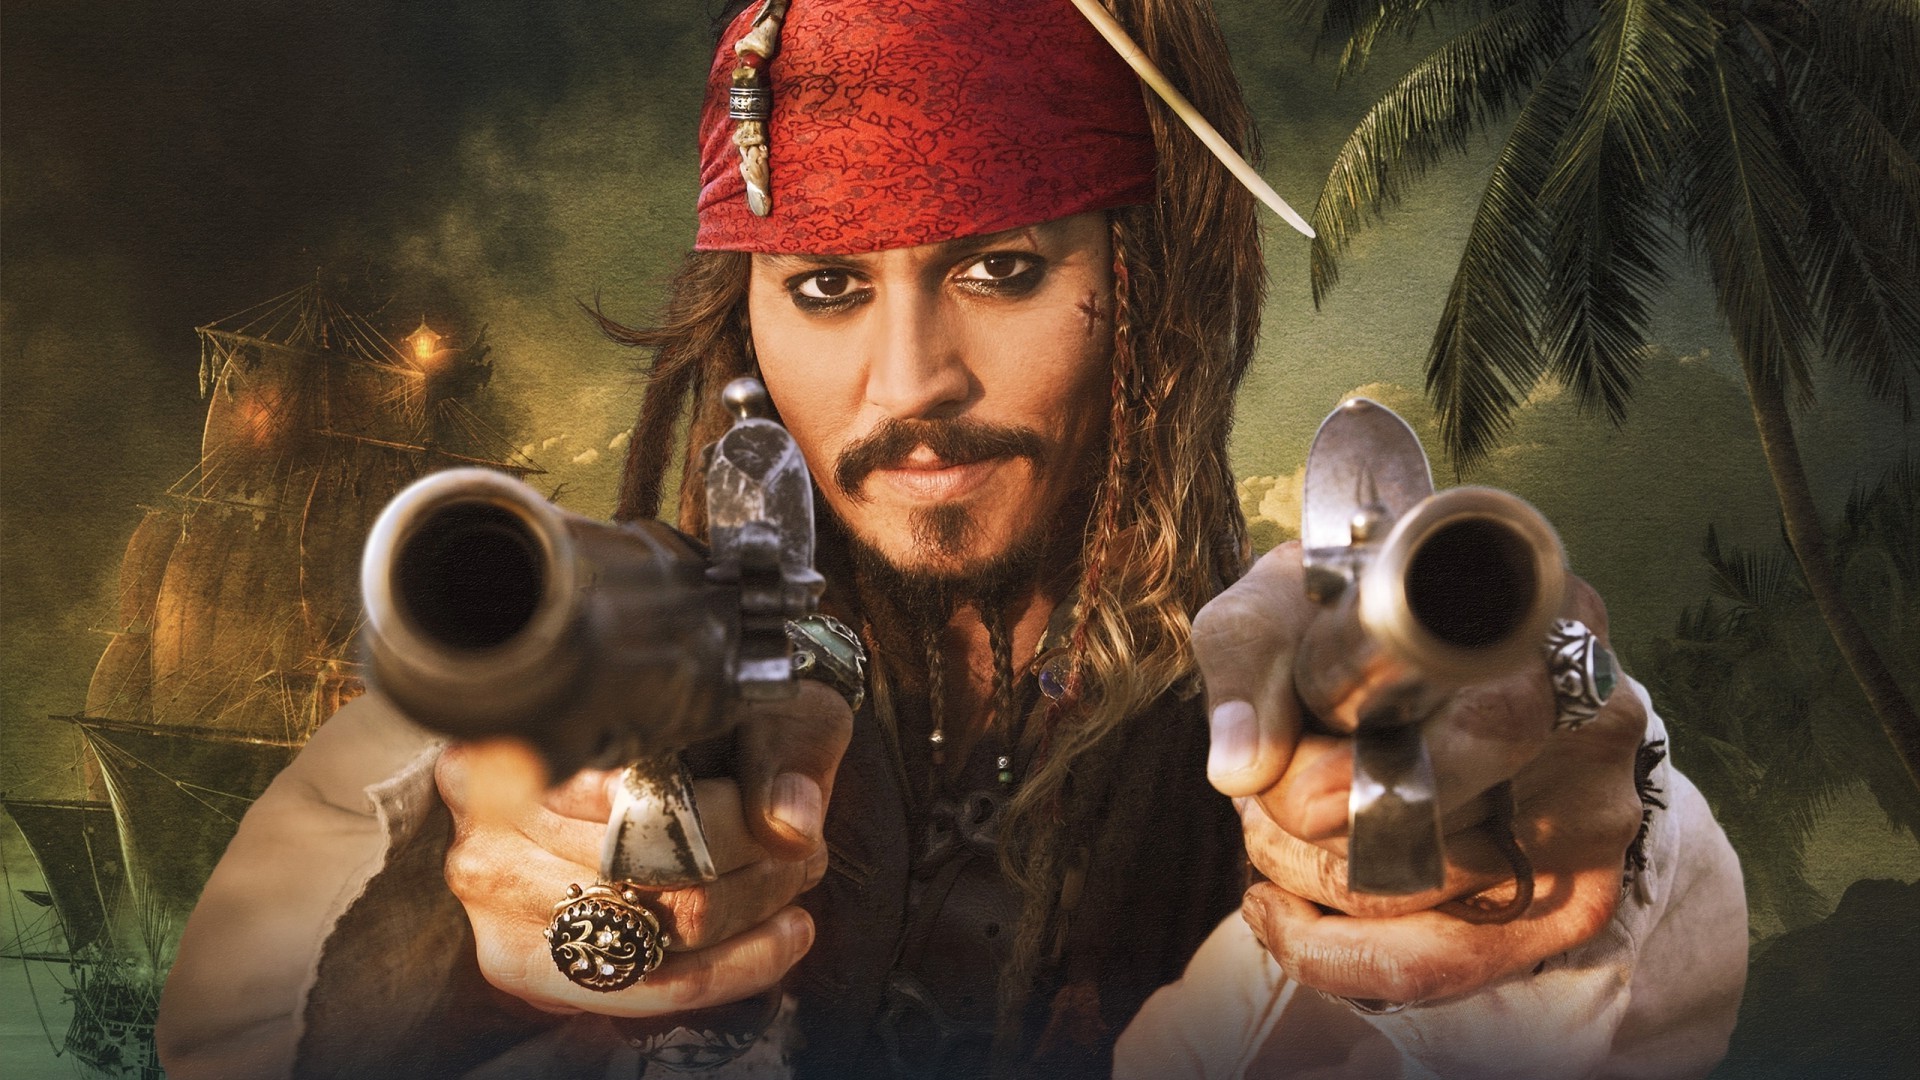 pirates of the caribbean online you cannot board an island while the navy is hunting you